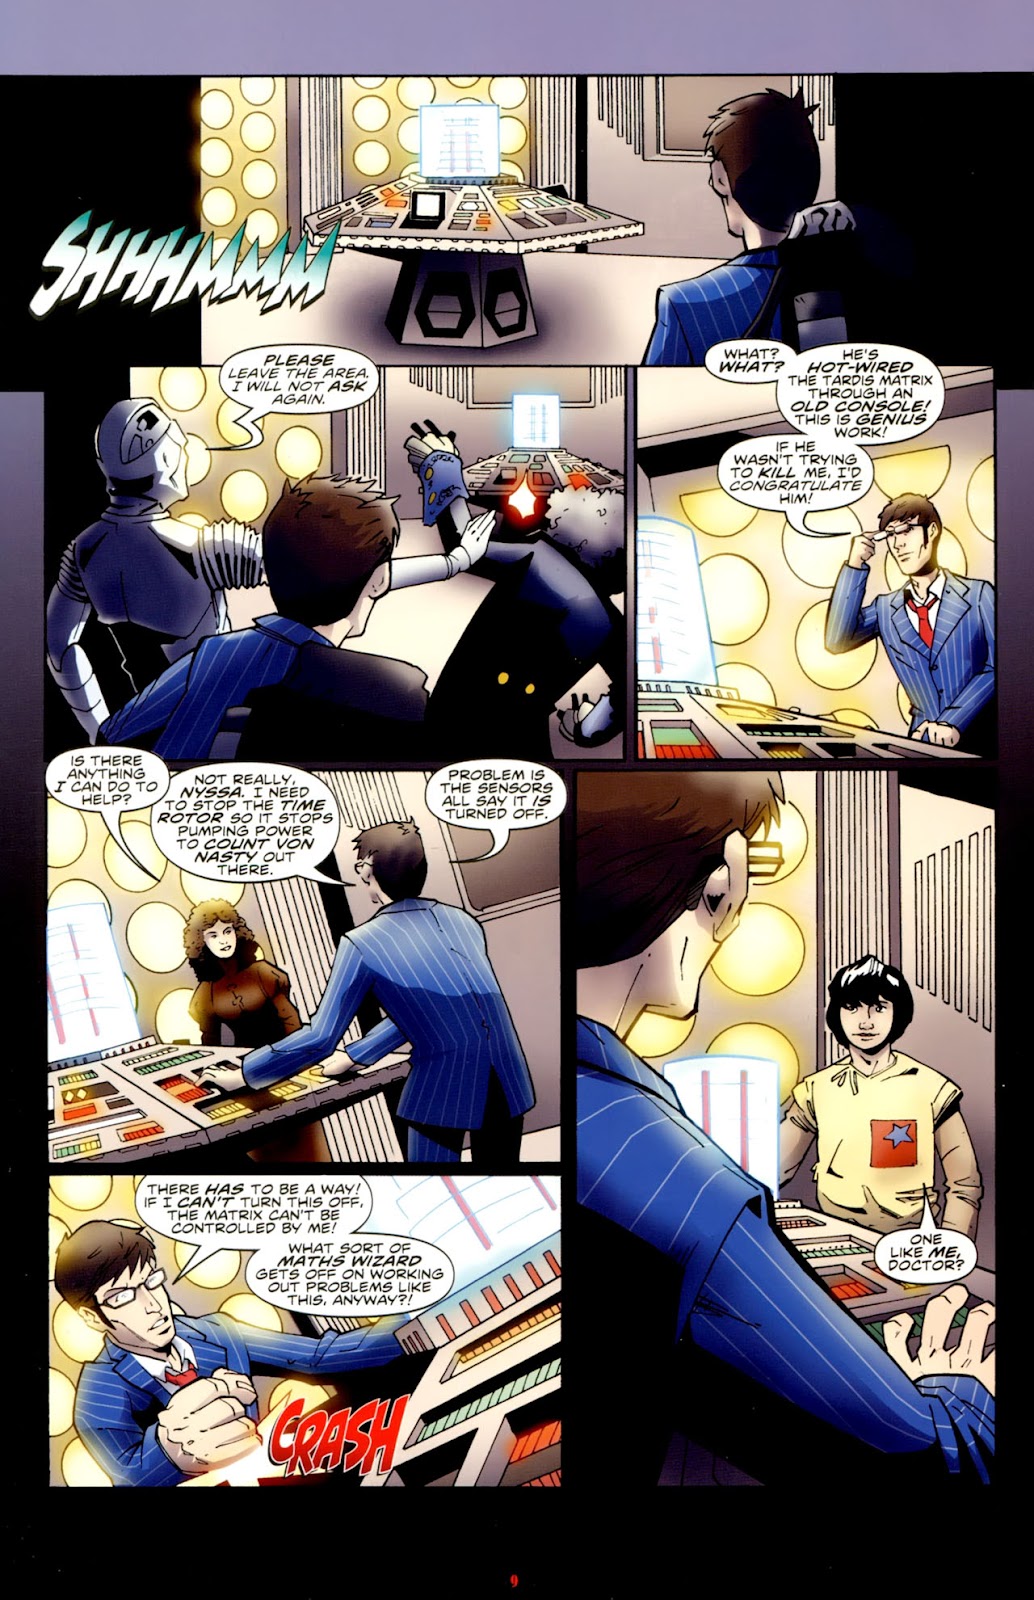 Doctor Who: The Forgotten issue 6 - Page 11